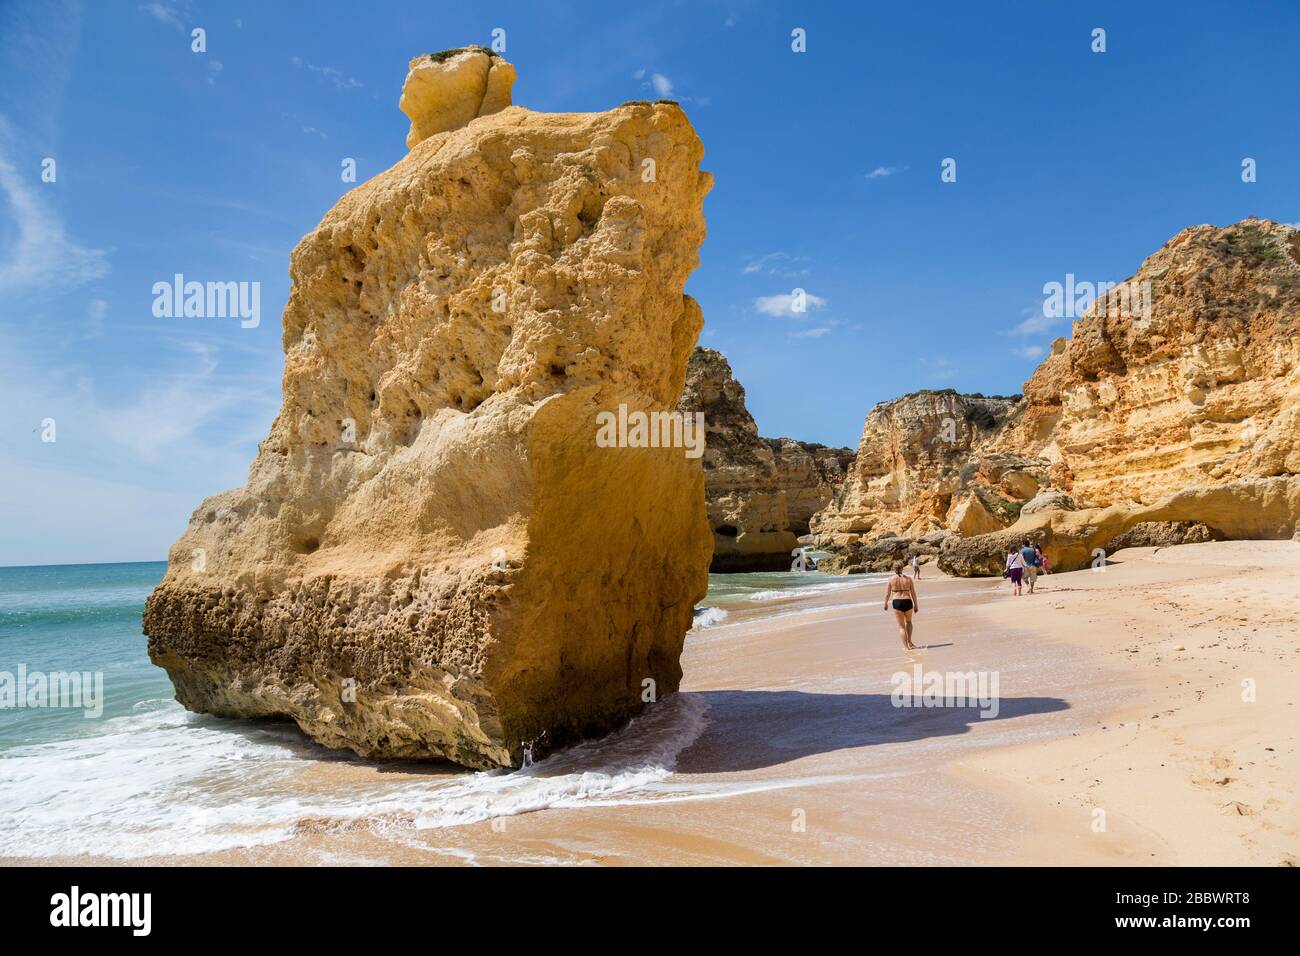 People on a secluded beach to the west of Alporchinhas, Algarve, Portugal Stock Photo